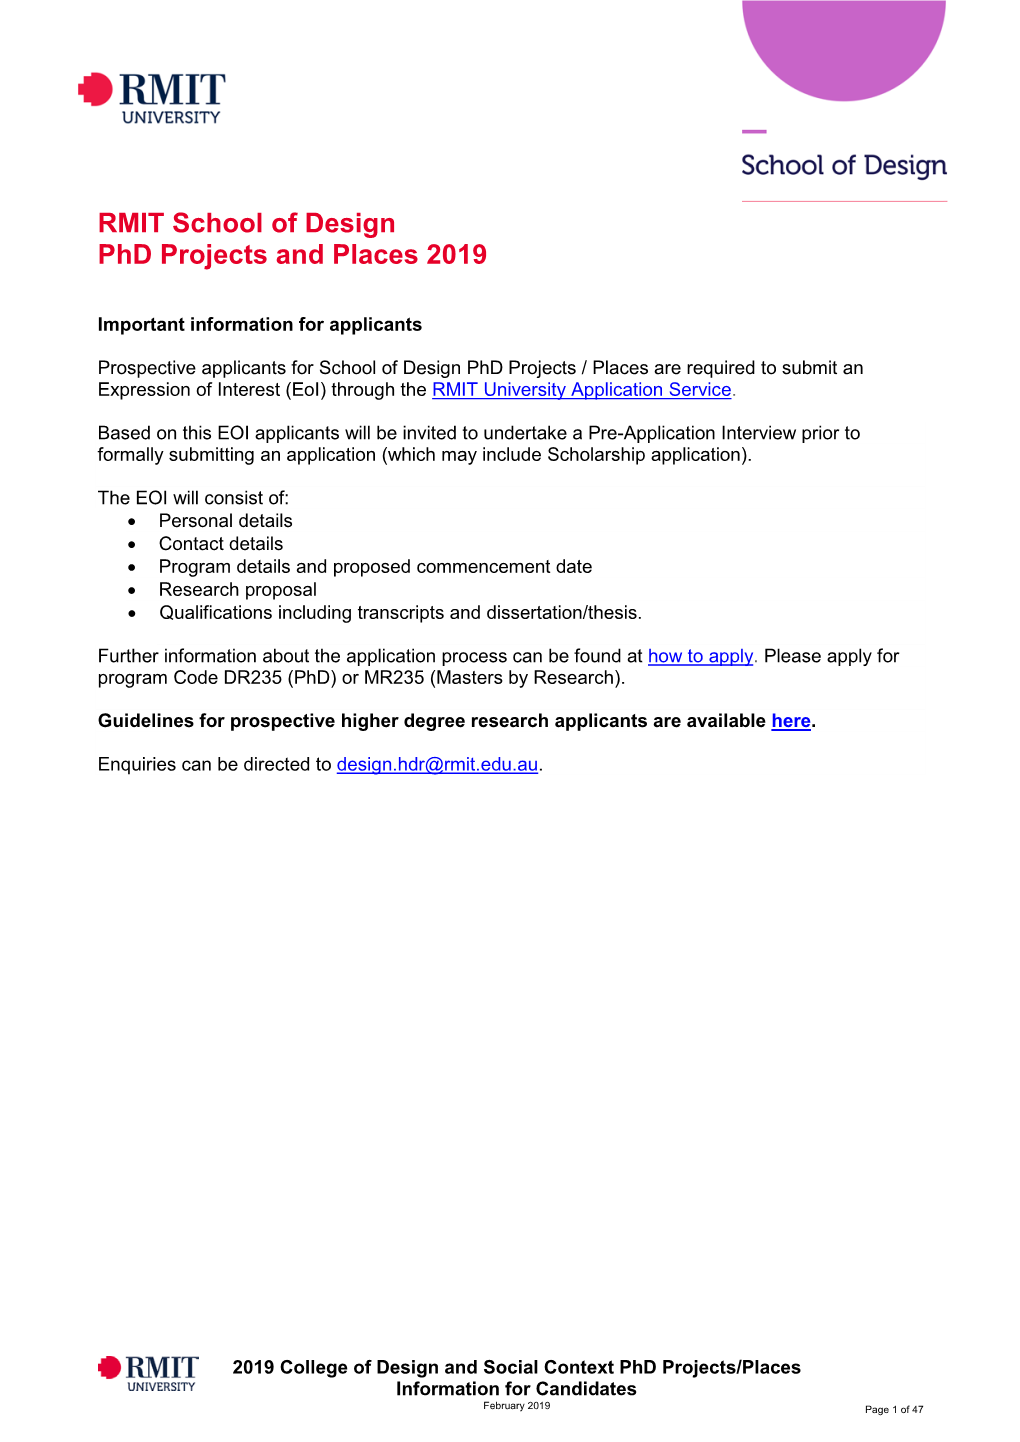 RMIT School of Design Phd Projects and Places 2019